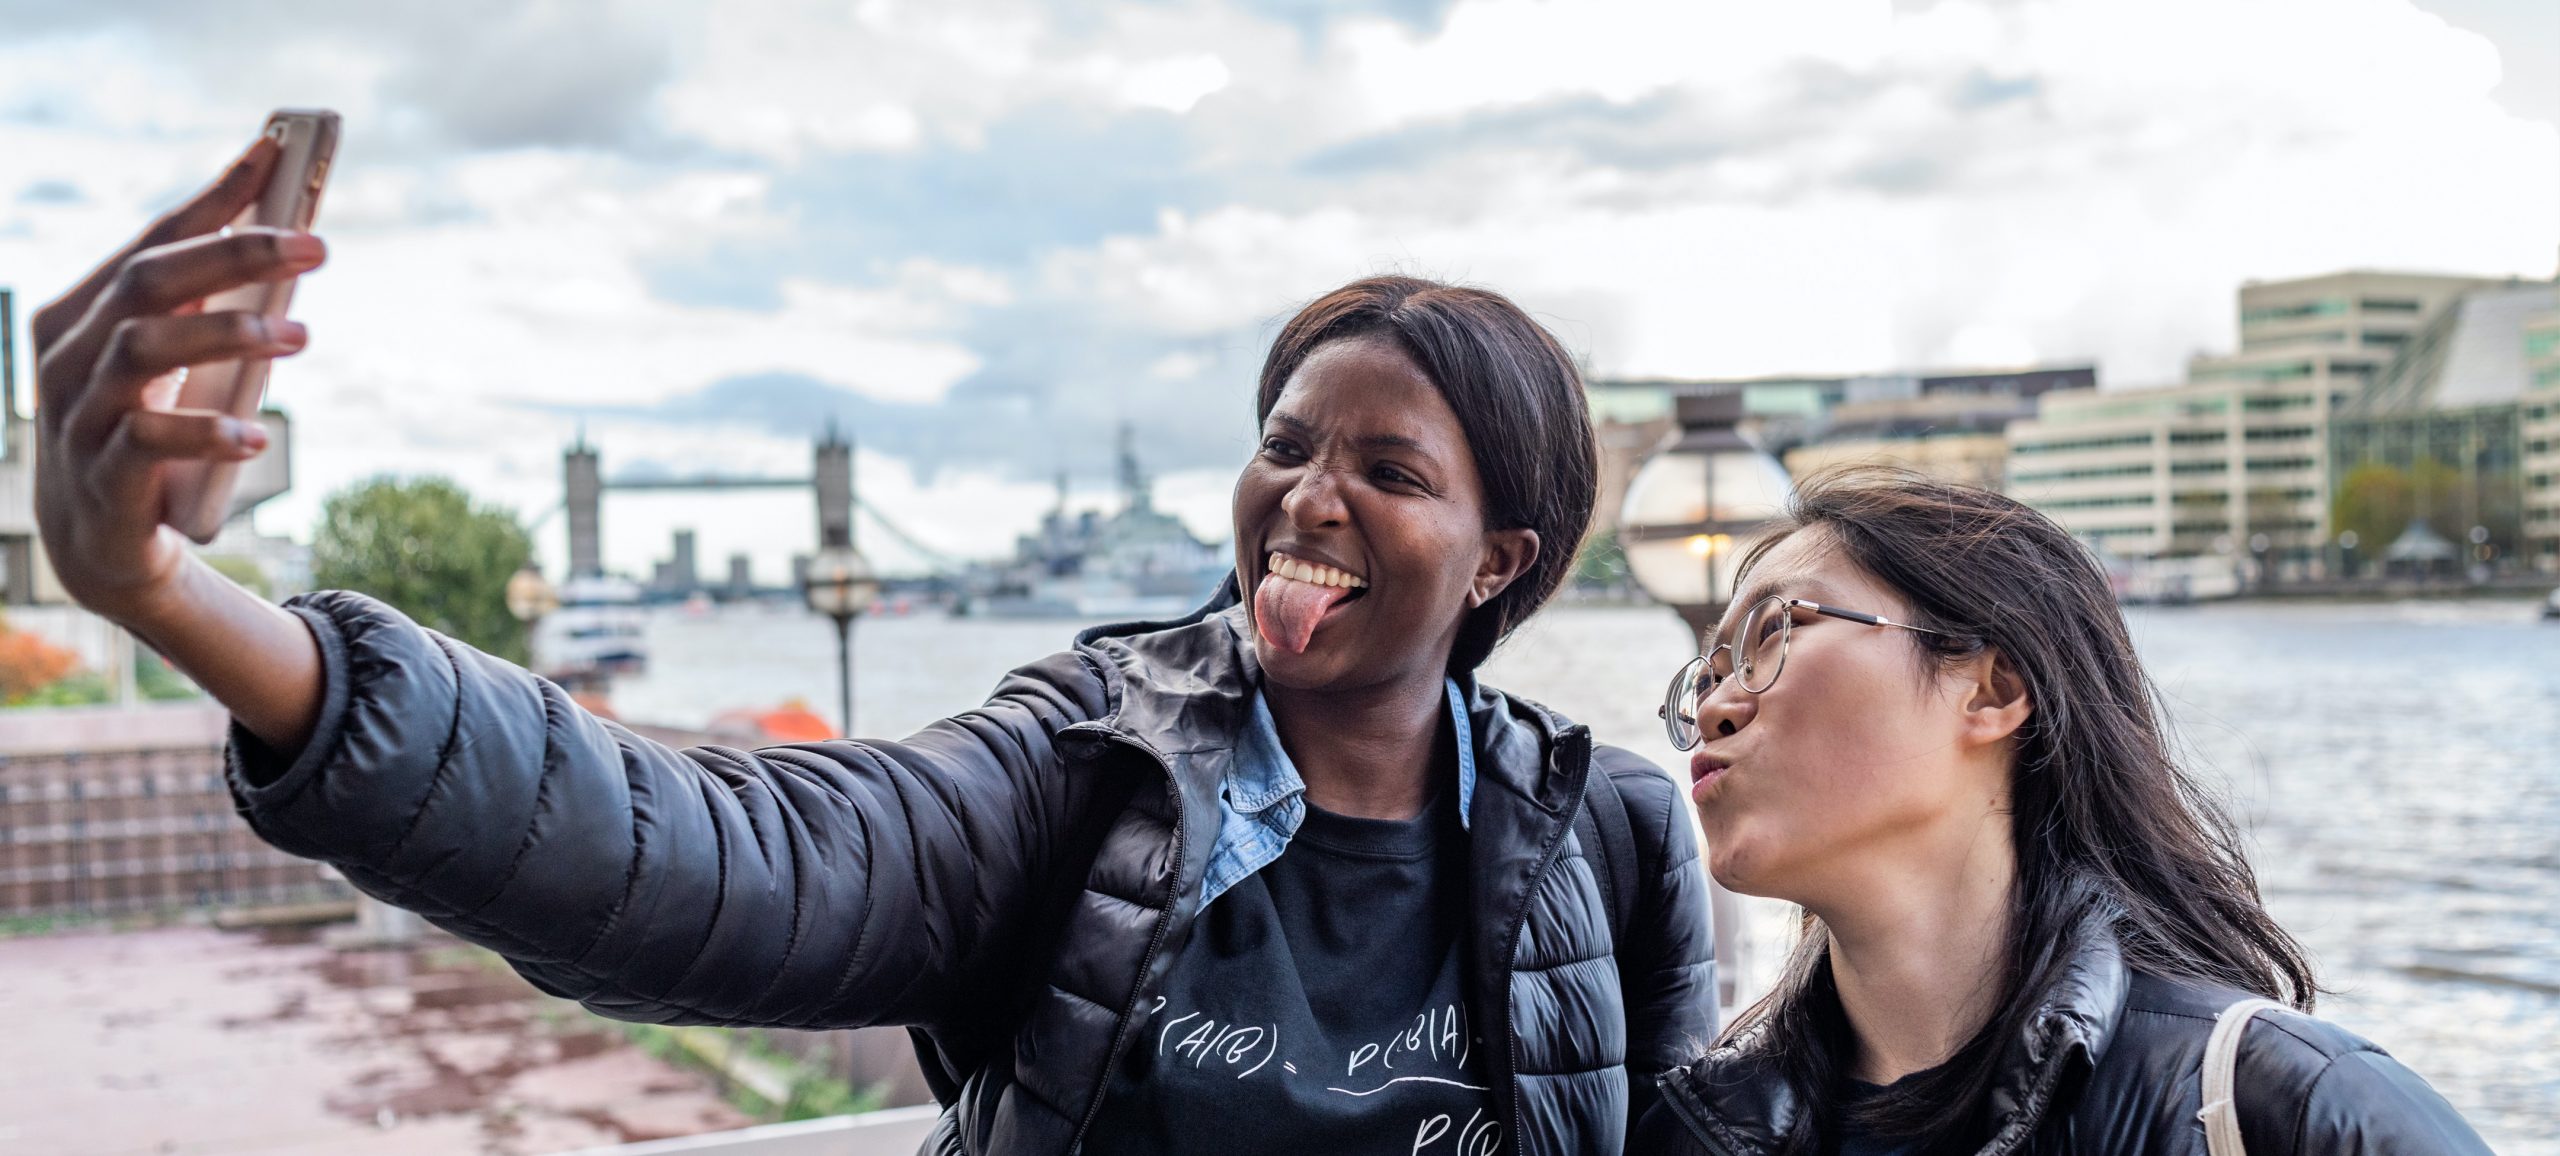 Bayes Business School, commisioned photography of students taking a selfie near London Bridge